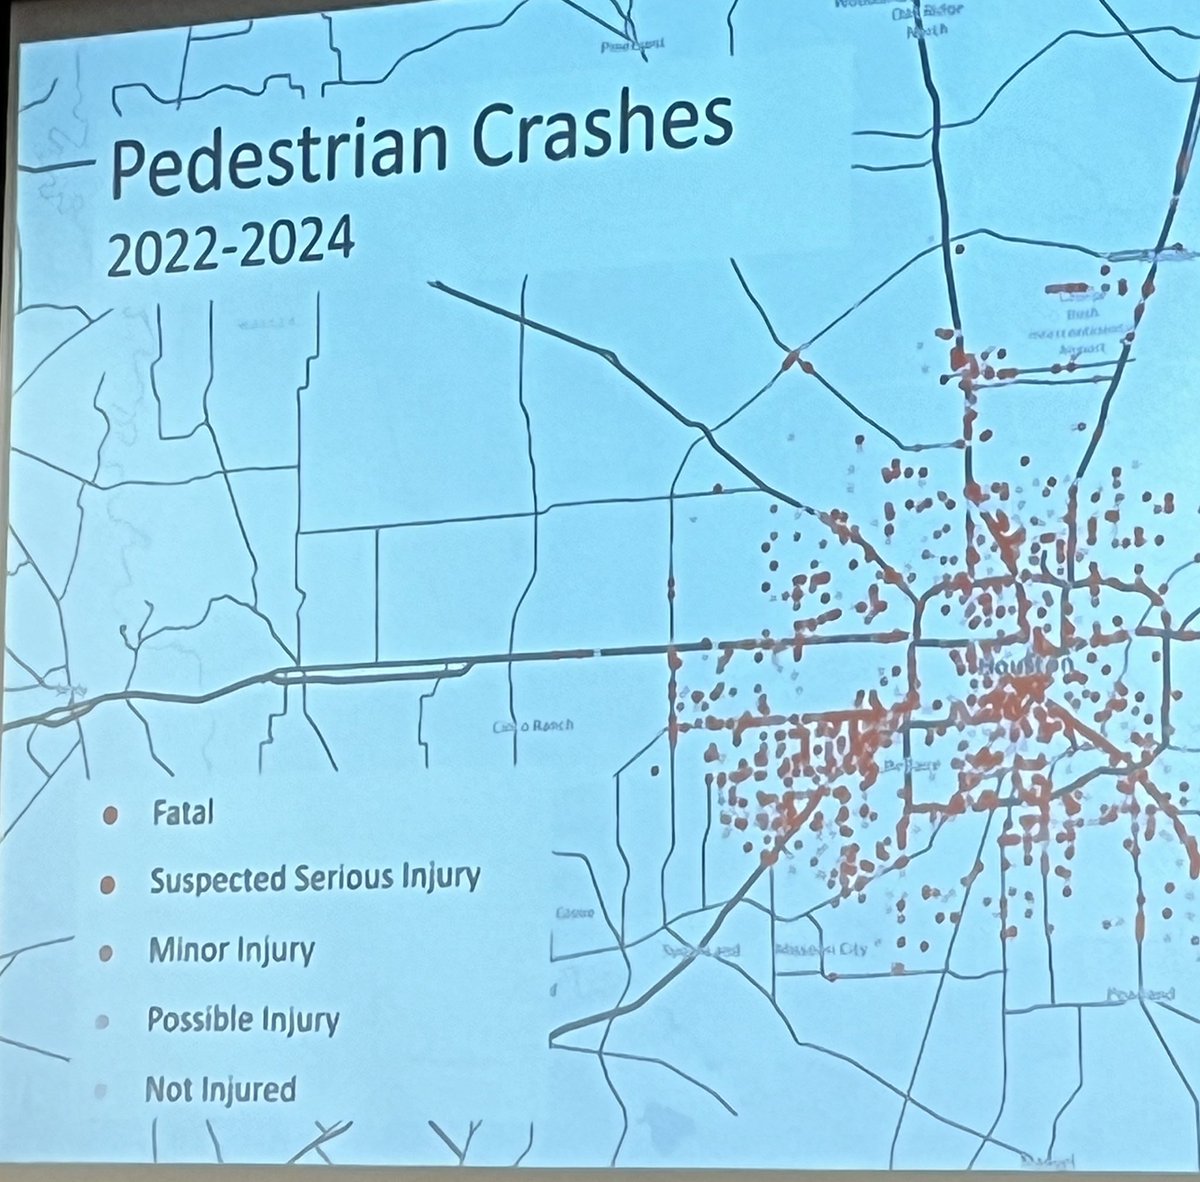 Can you spot The Houston Arrow?
#VisionZero #SafeStreetsForAll #PublicSafety